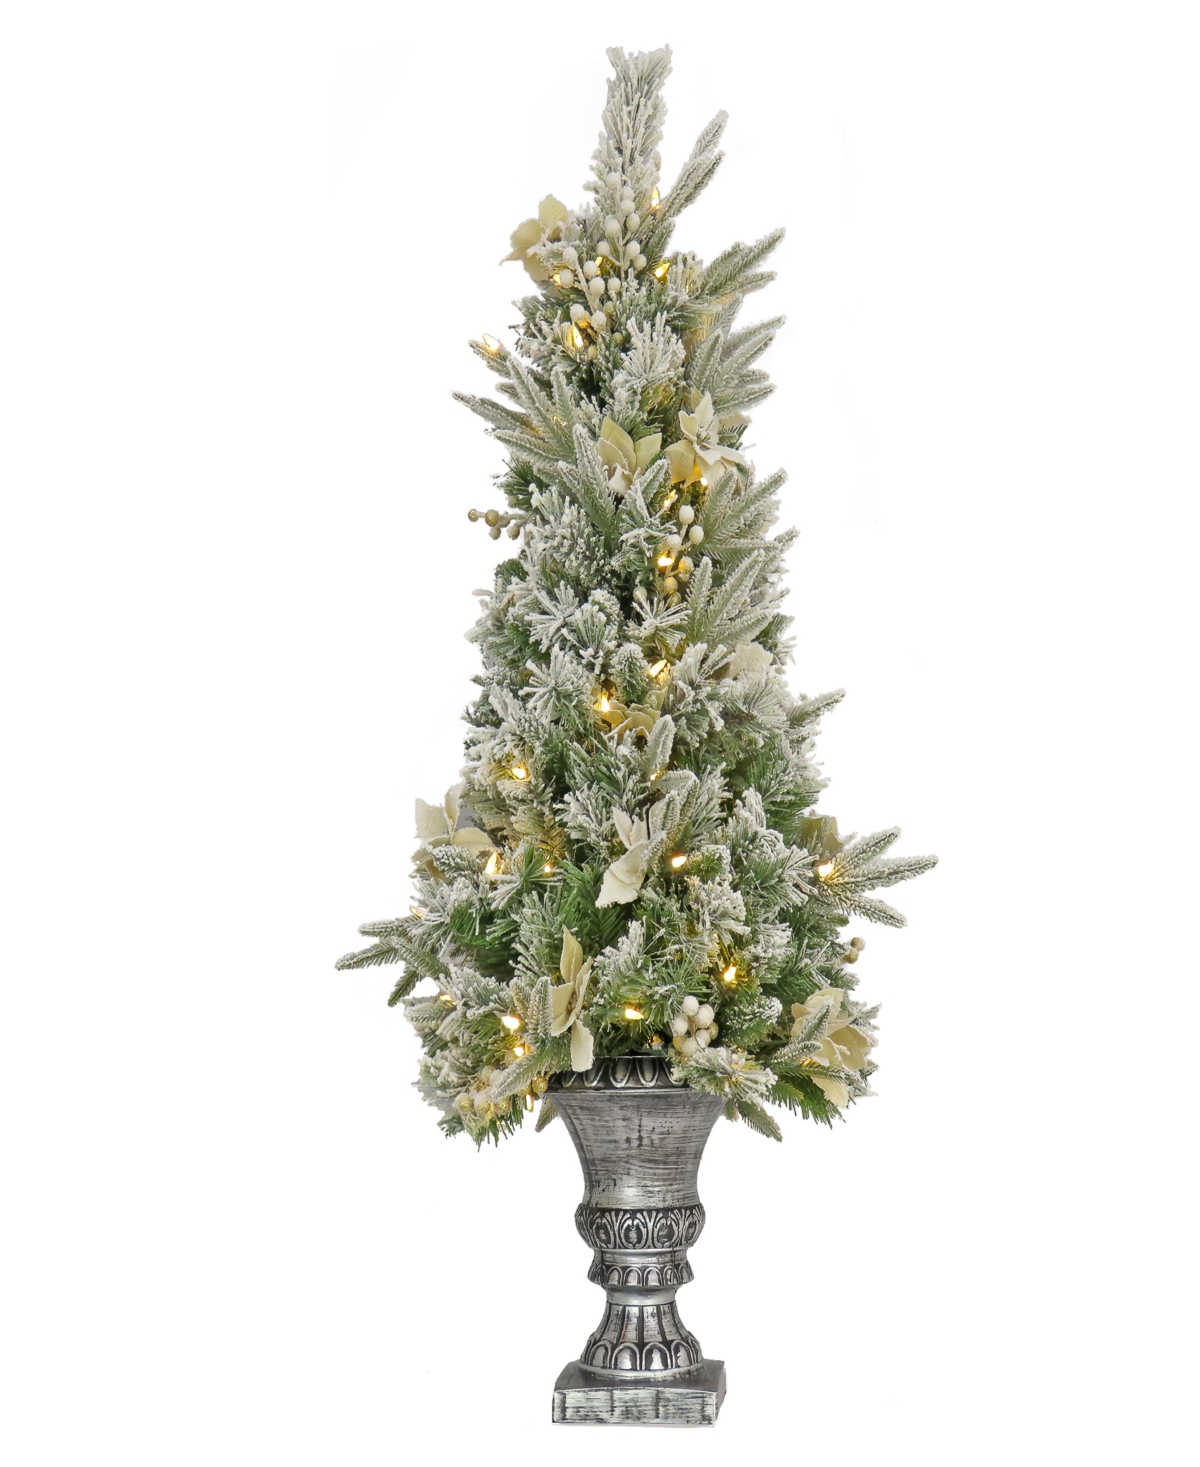 4' Frosted Colonial Fir Entrance Tree with Warm Led Lights - Green